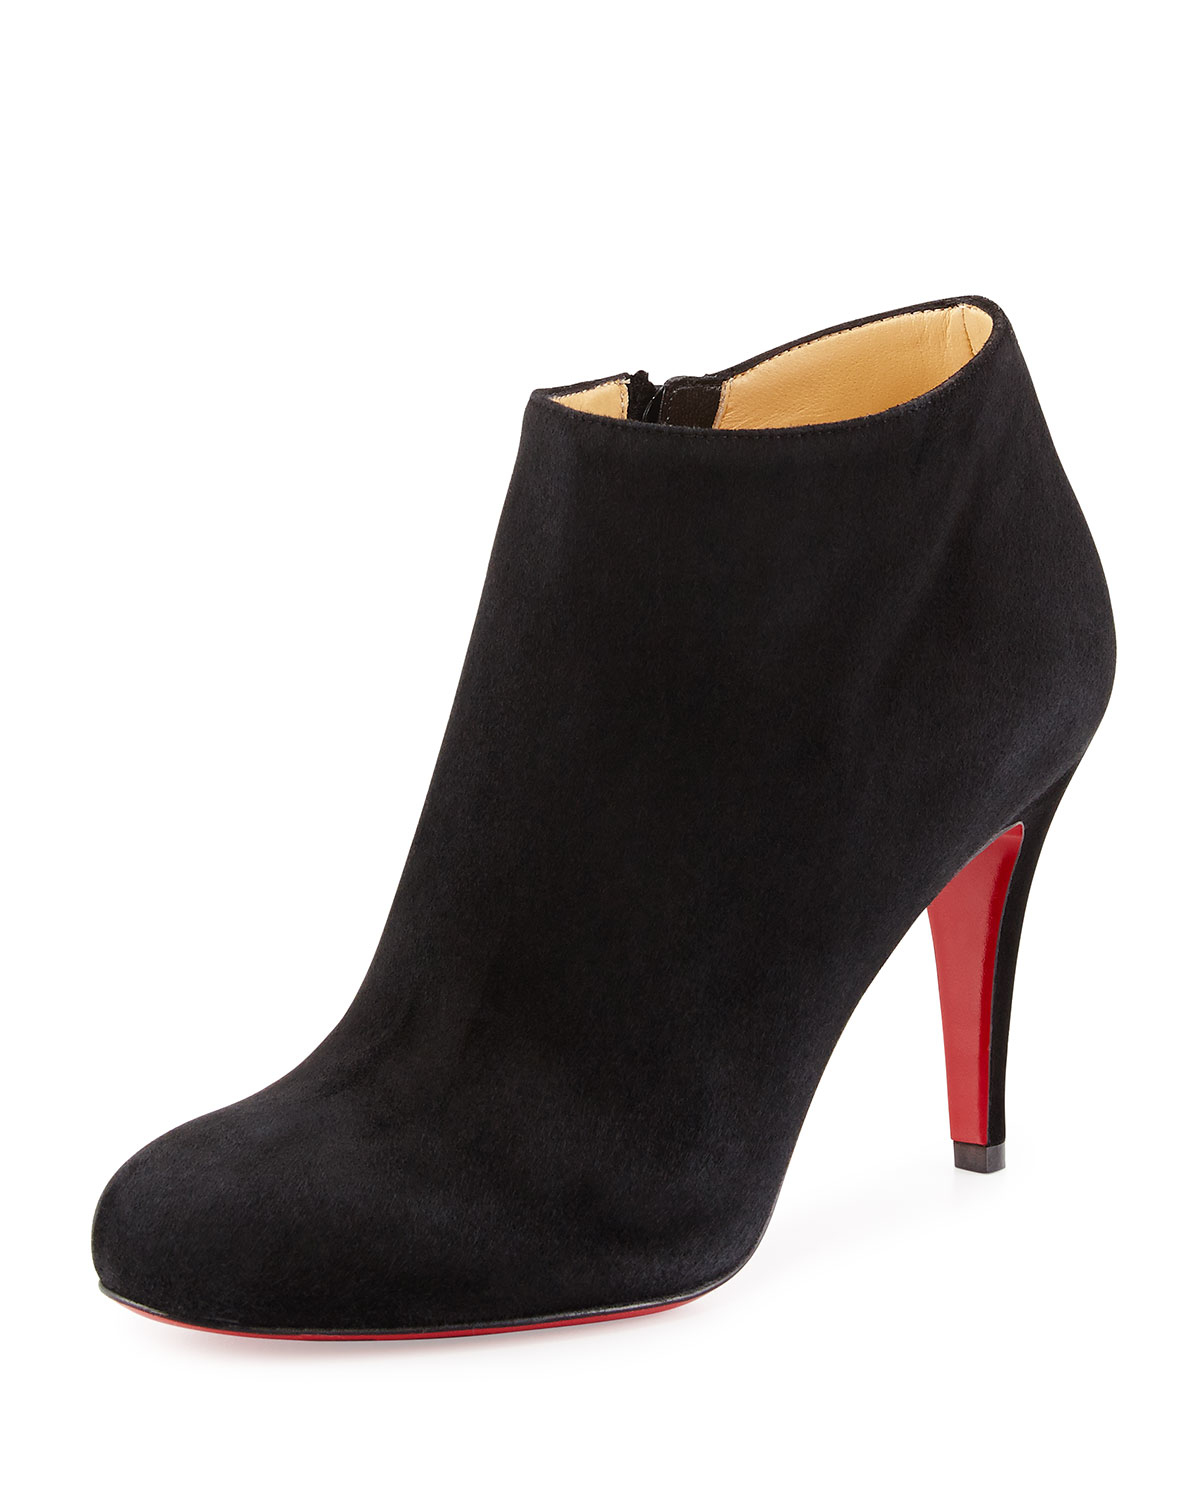 Christian louboutin Belle Round-toe Suede Red Sole Bootie in Black | Lyst